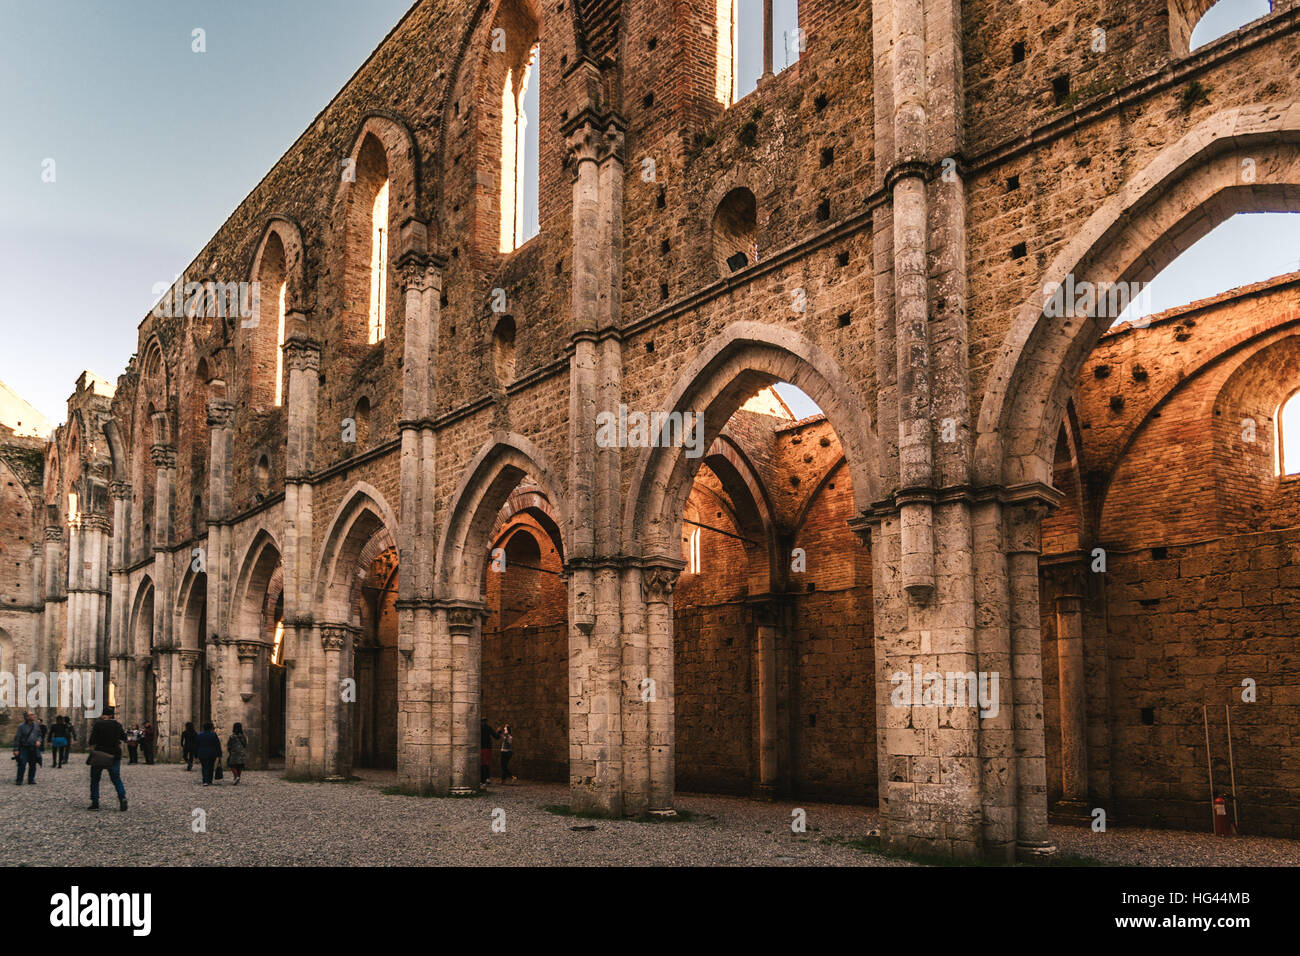 Remains of the Cistercian Abbey of San Galgano, situated near Siena, Italy. Stock Photo